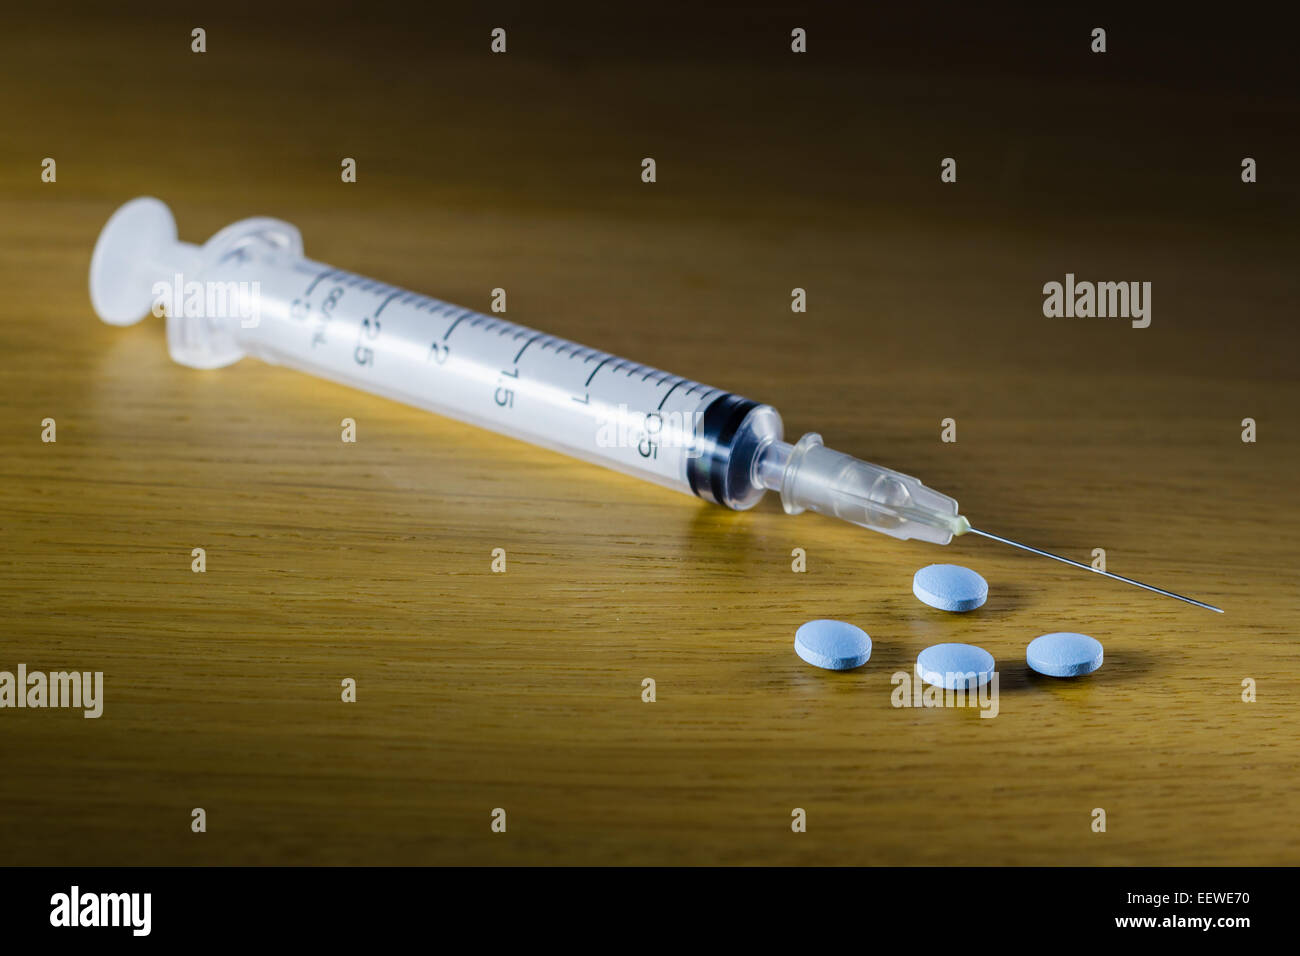 Drug syringe and cooked heroin on wood table Stock Photo